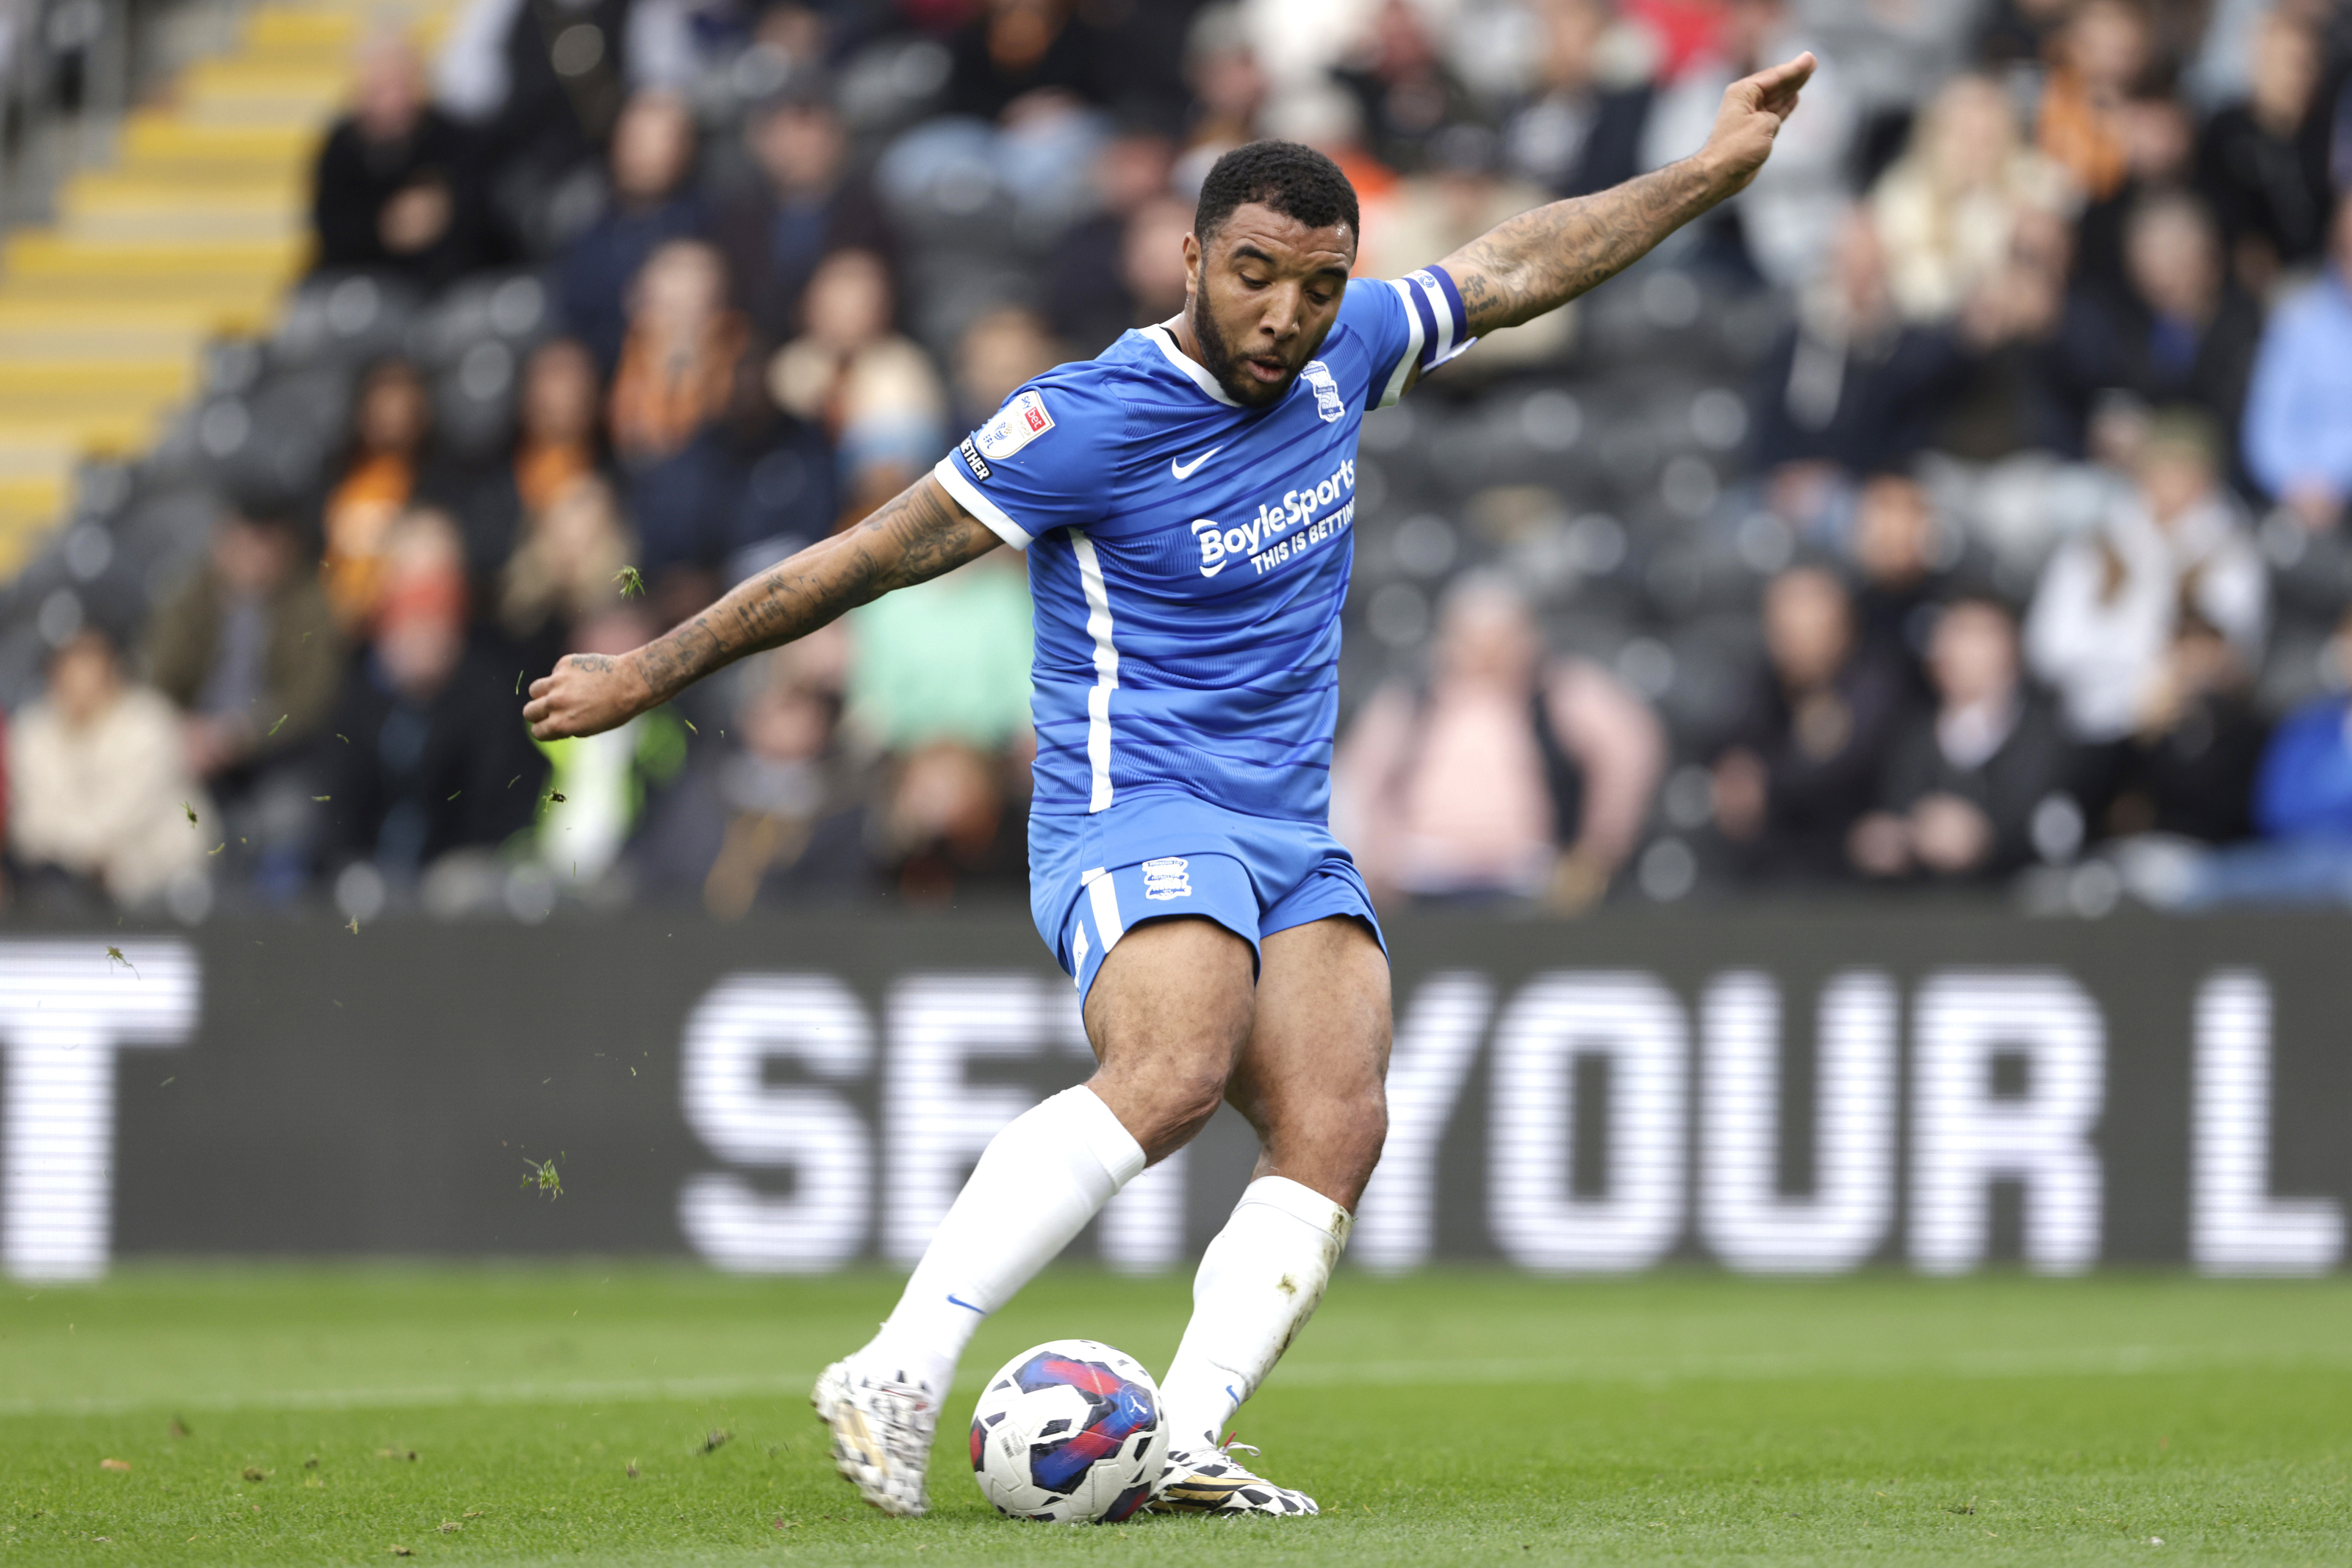 Birmingham City's Troy Deeney during a match in October 